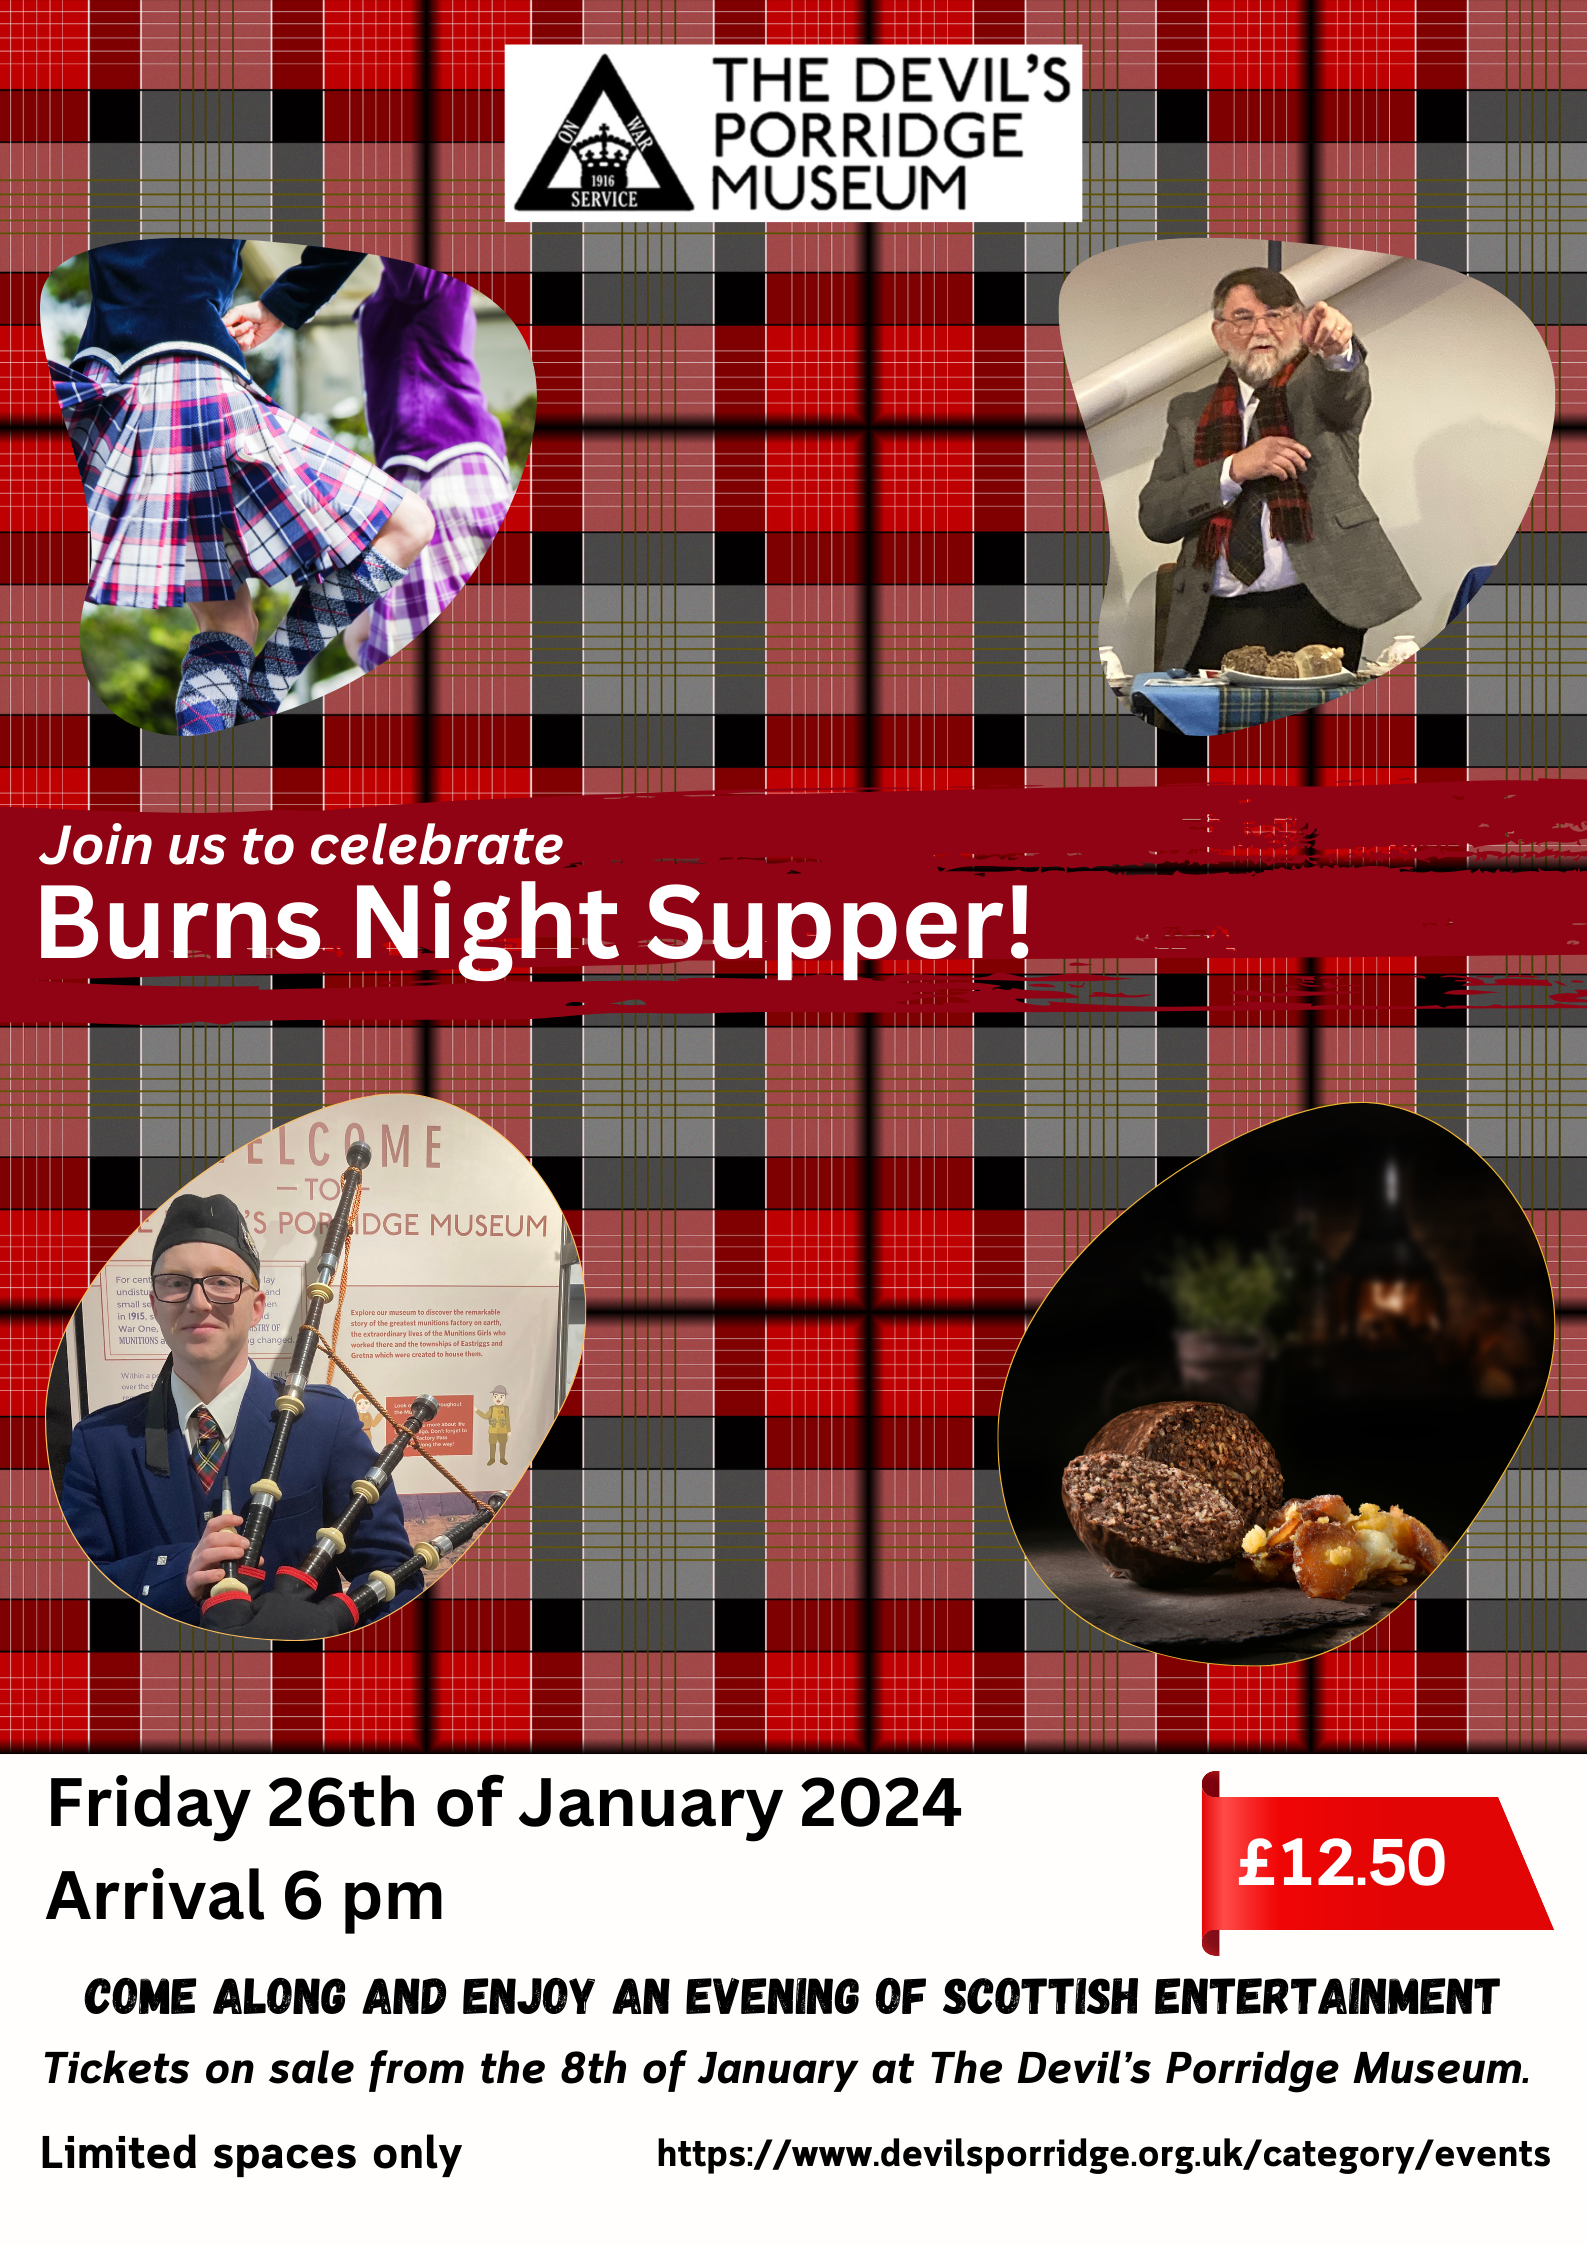 A poster for a Burns Night Supper event at The Devil's Porridge Museum. It reads "Friday 26th of January 2024 Arrival 6pm £12.50 Come along and enjoy an evening of Scottish Entertainment. Tickets on sale from 8th January at The Devil's Porridge Museum. Limited Spaces only." It includes photos of a bagpiper and haggis.